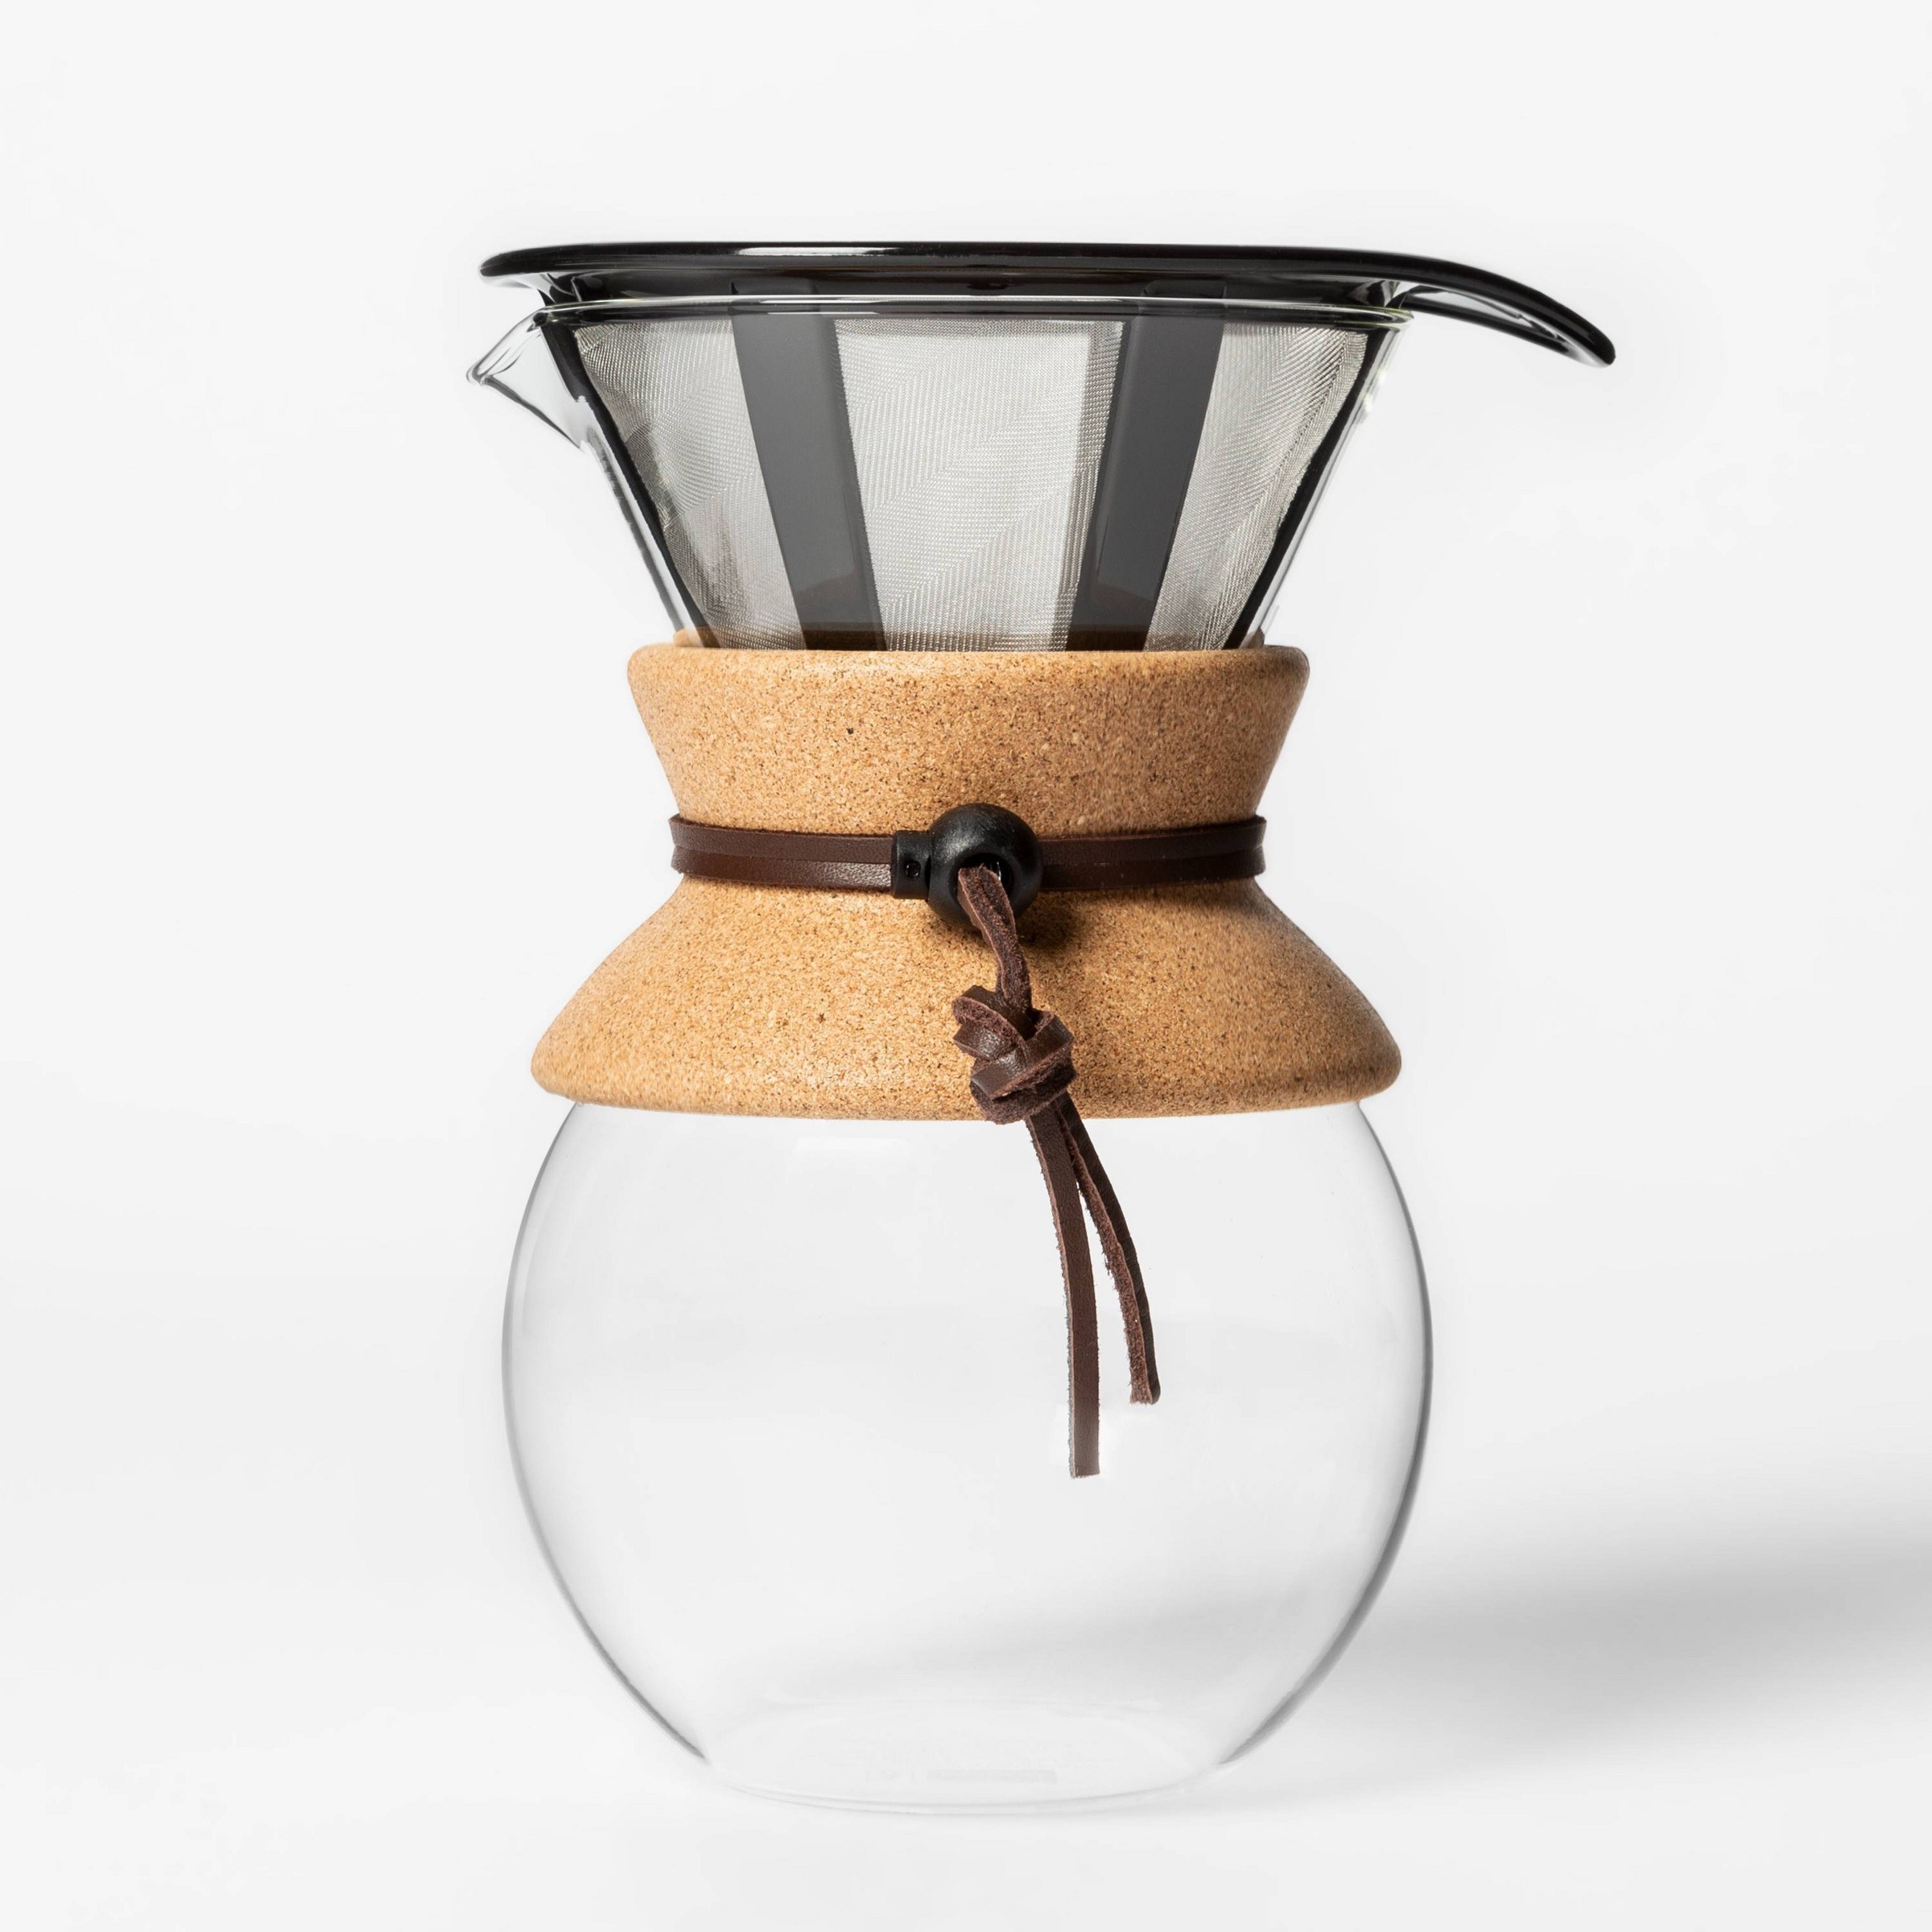 the bodum coffee maker with filter inside